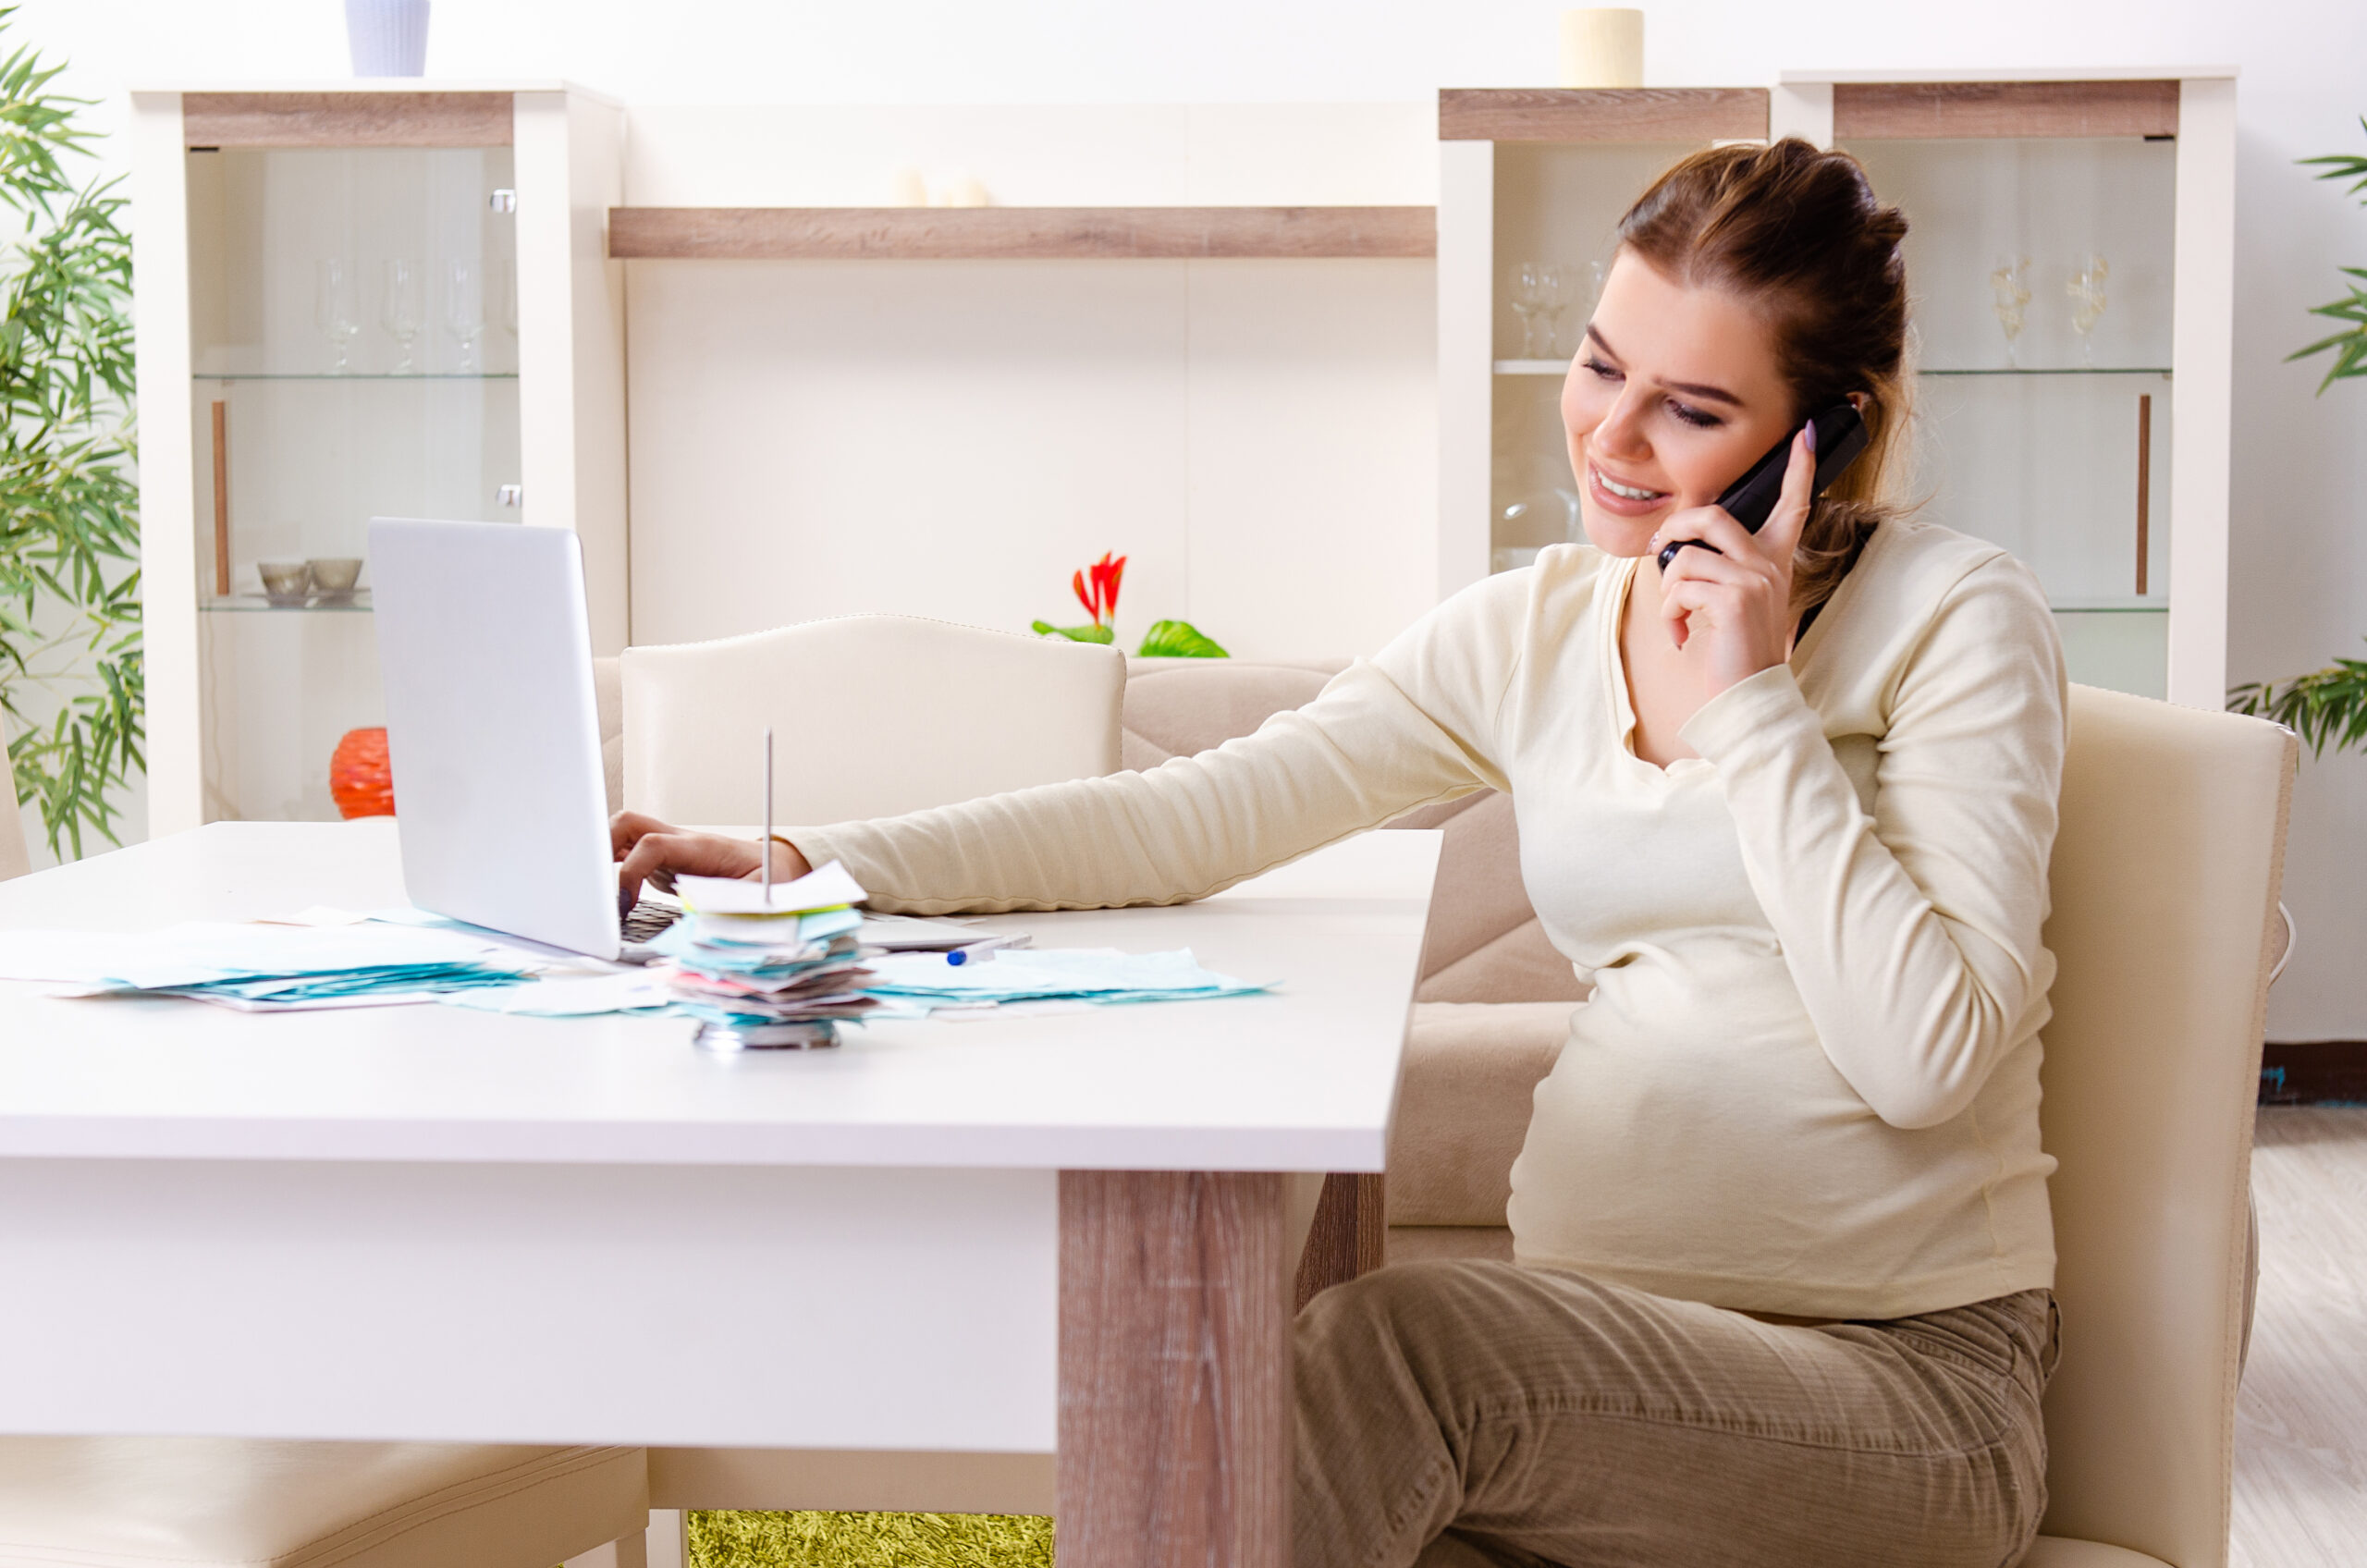 A surrogate mother talking on the phone while using a laptop, with paperwork spread out on her table, discussing tax details with a financial advisor.